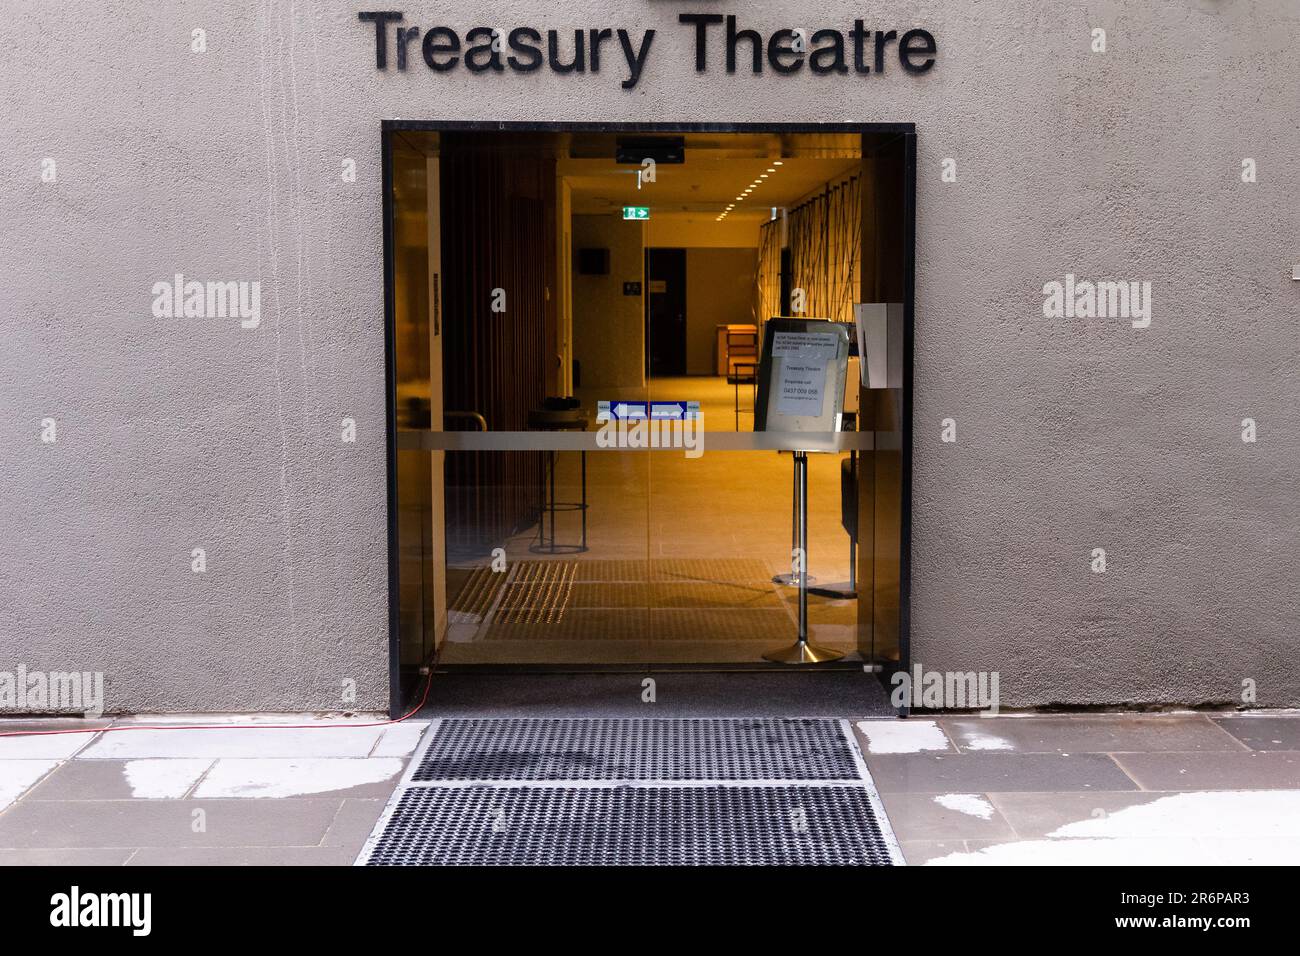 MELBOURNE, AUSTRALIA - SEPTEMBER 26: A view of the entrance to Treasury place during a press conference at Treasury Theatre on September 26, 2020 in Melbourne, Australia. Victoria's health minister Jenny Mikakos has resigned on Saturday after the hotel quarantine inquiry. Premier Daniel Andrews gave evidence on the final day of the inquiry on Friday saying he regarded Jenny Mikakos accountable for the program that ultimately led to Victoria's COVID-19 second wave. Stock Photo